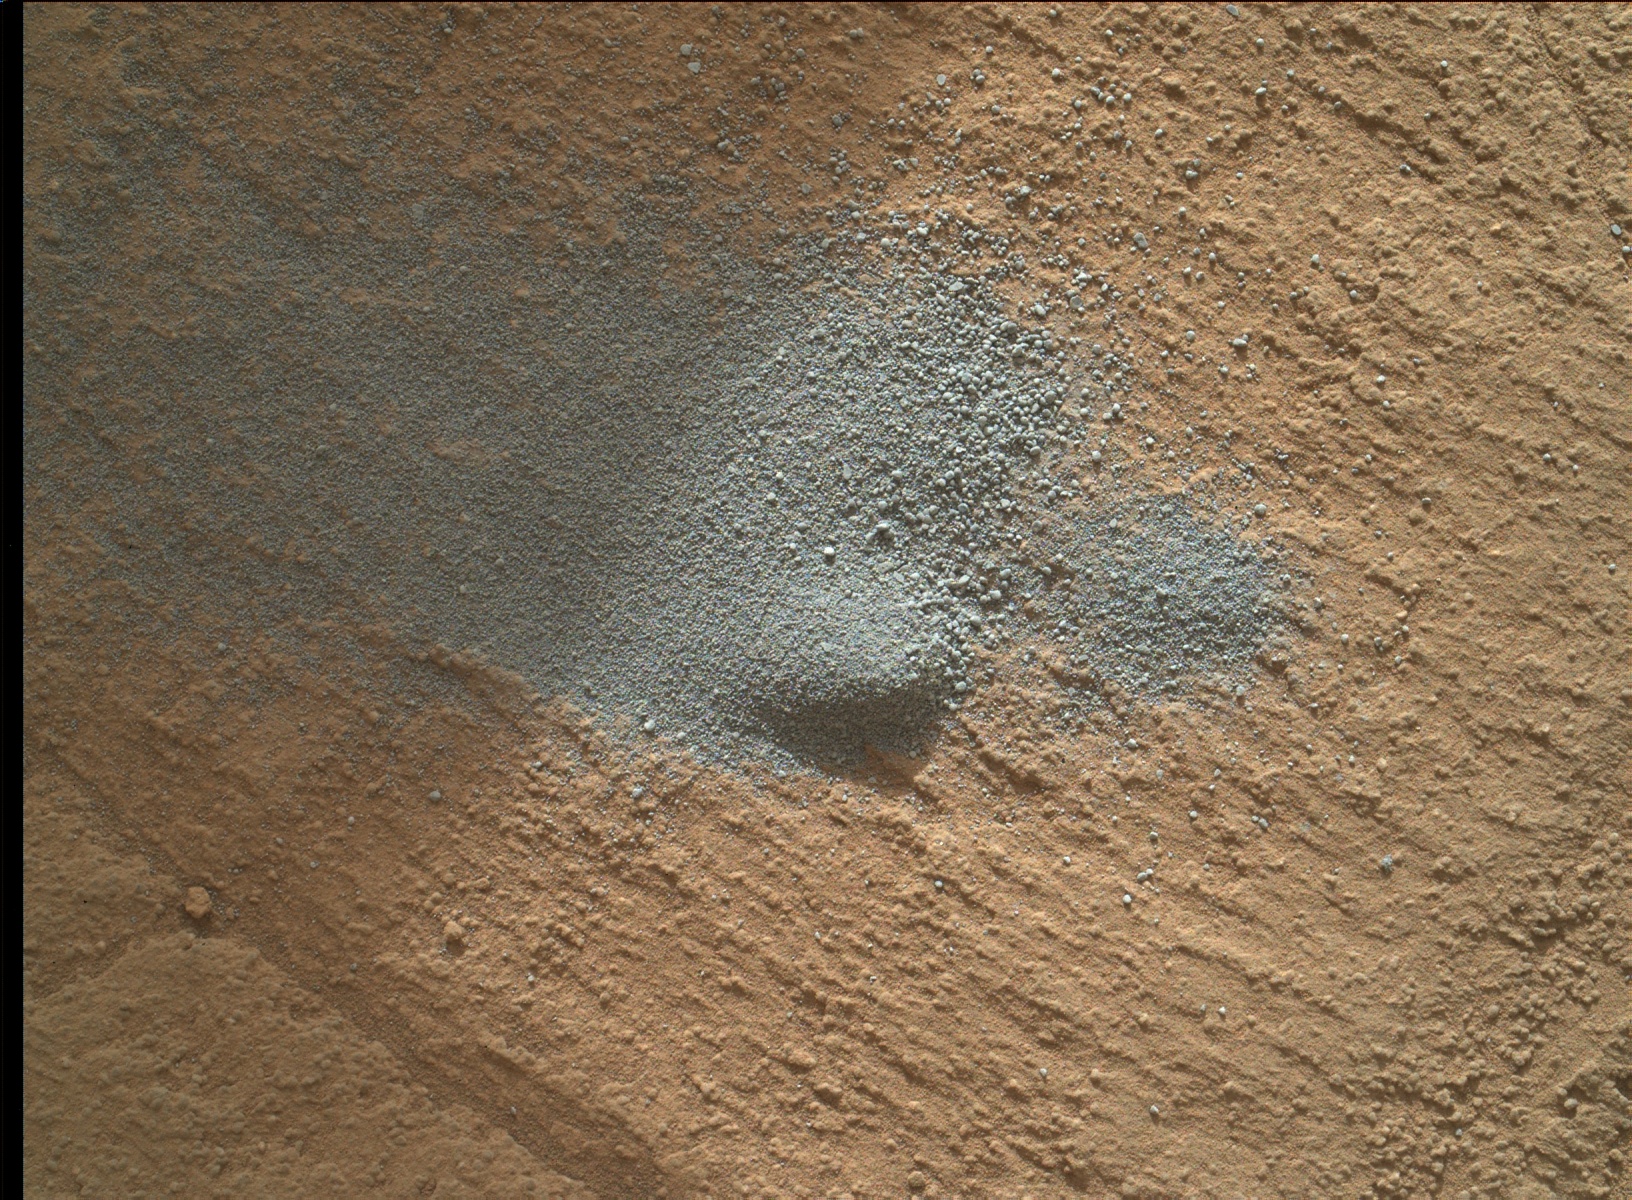 Nasa's Mars rover Curiosity acquired this image using its Mars Hand Lens Imager (MAHLI) on Sol 1339